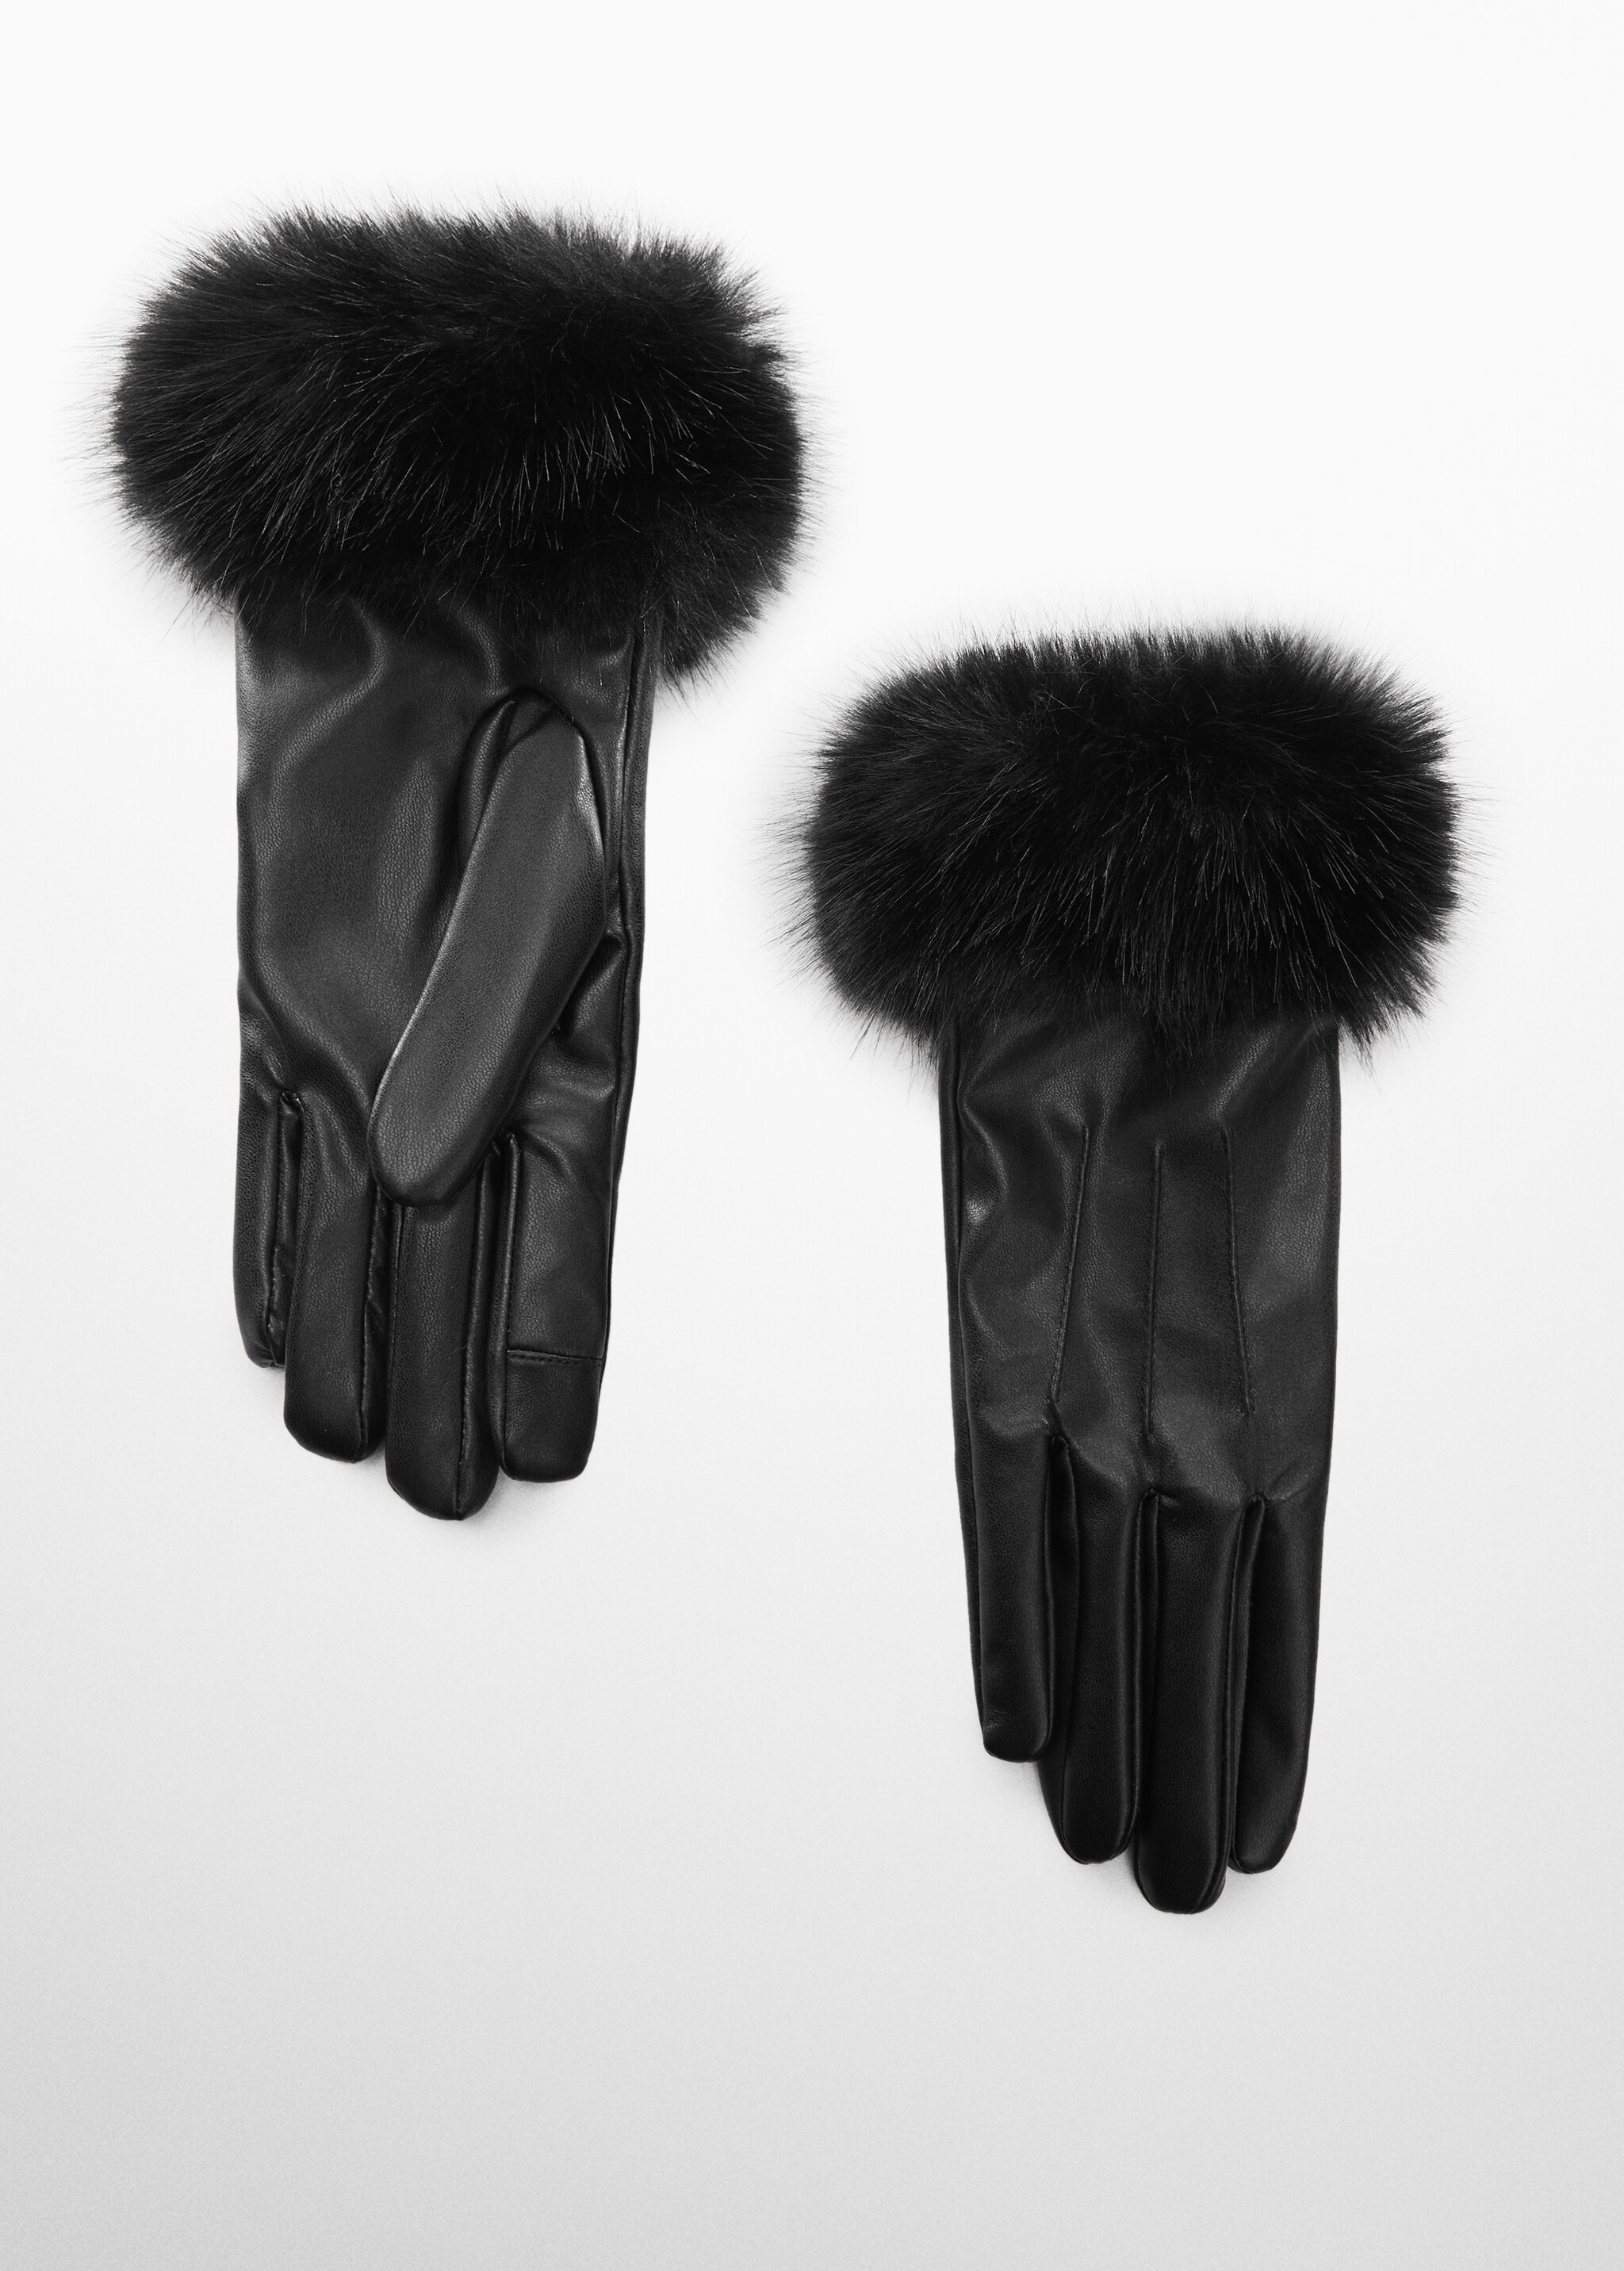 Combined hair gloves - Article without model